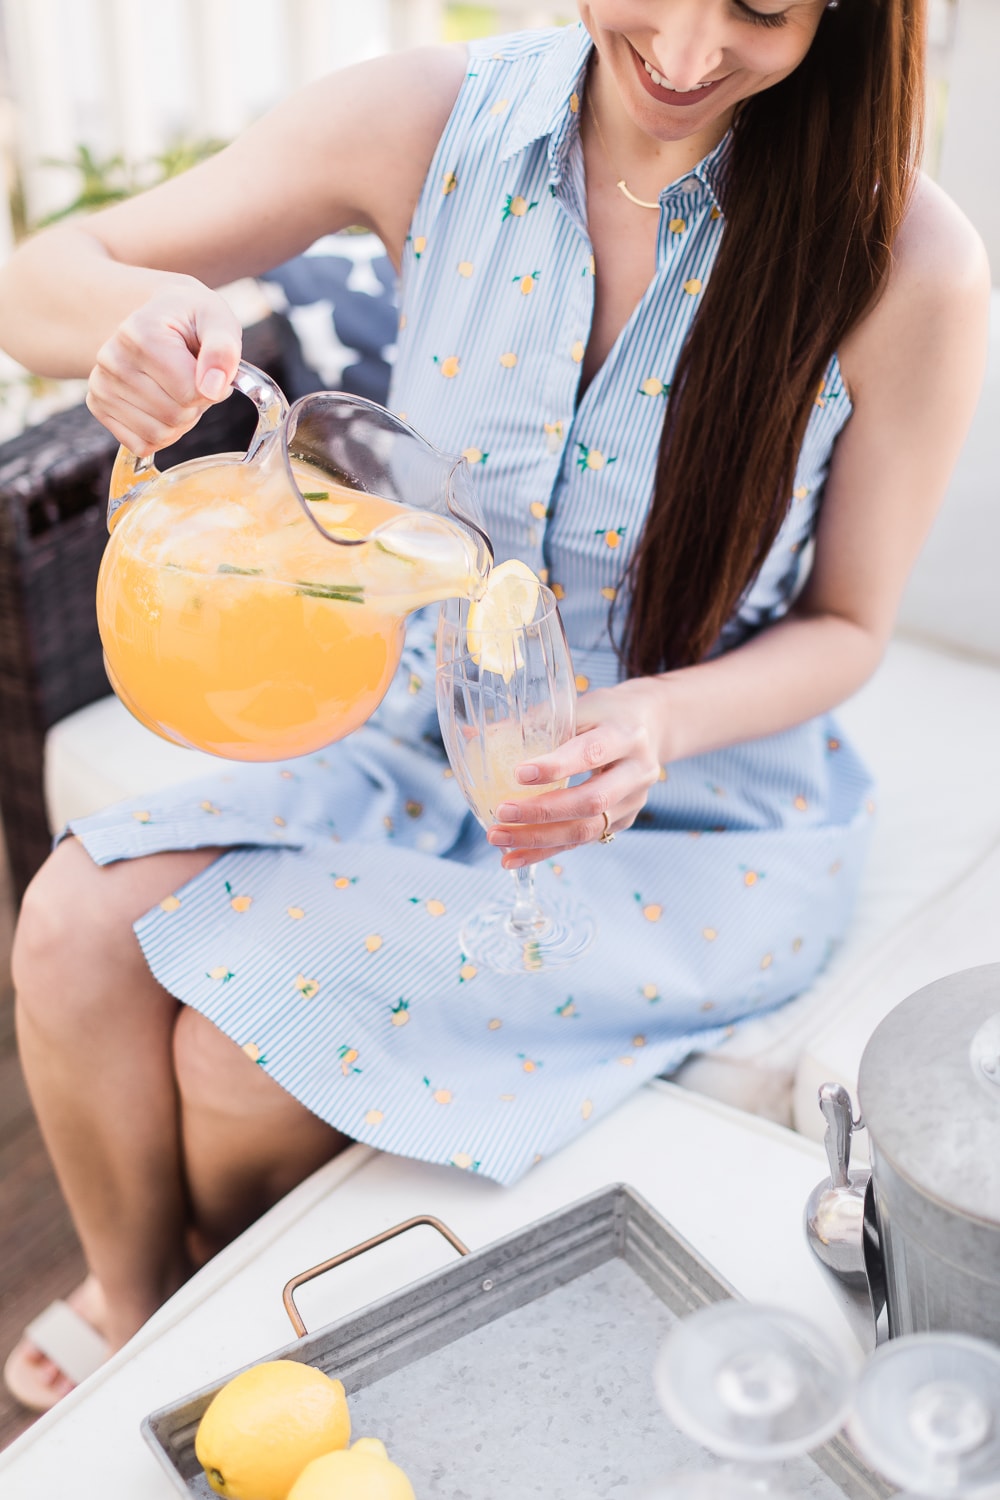 Sparkling punch recipe for spring by blogger Stephanie Ziajka on Diary of a Debutante